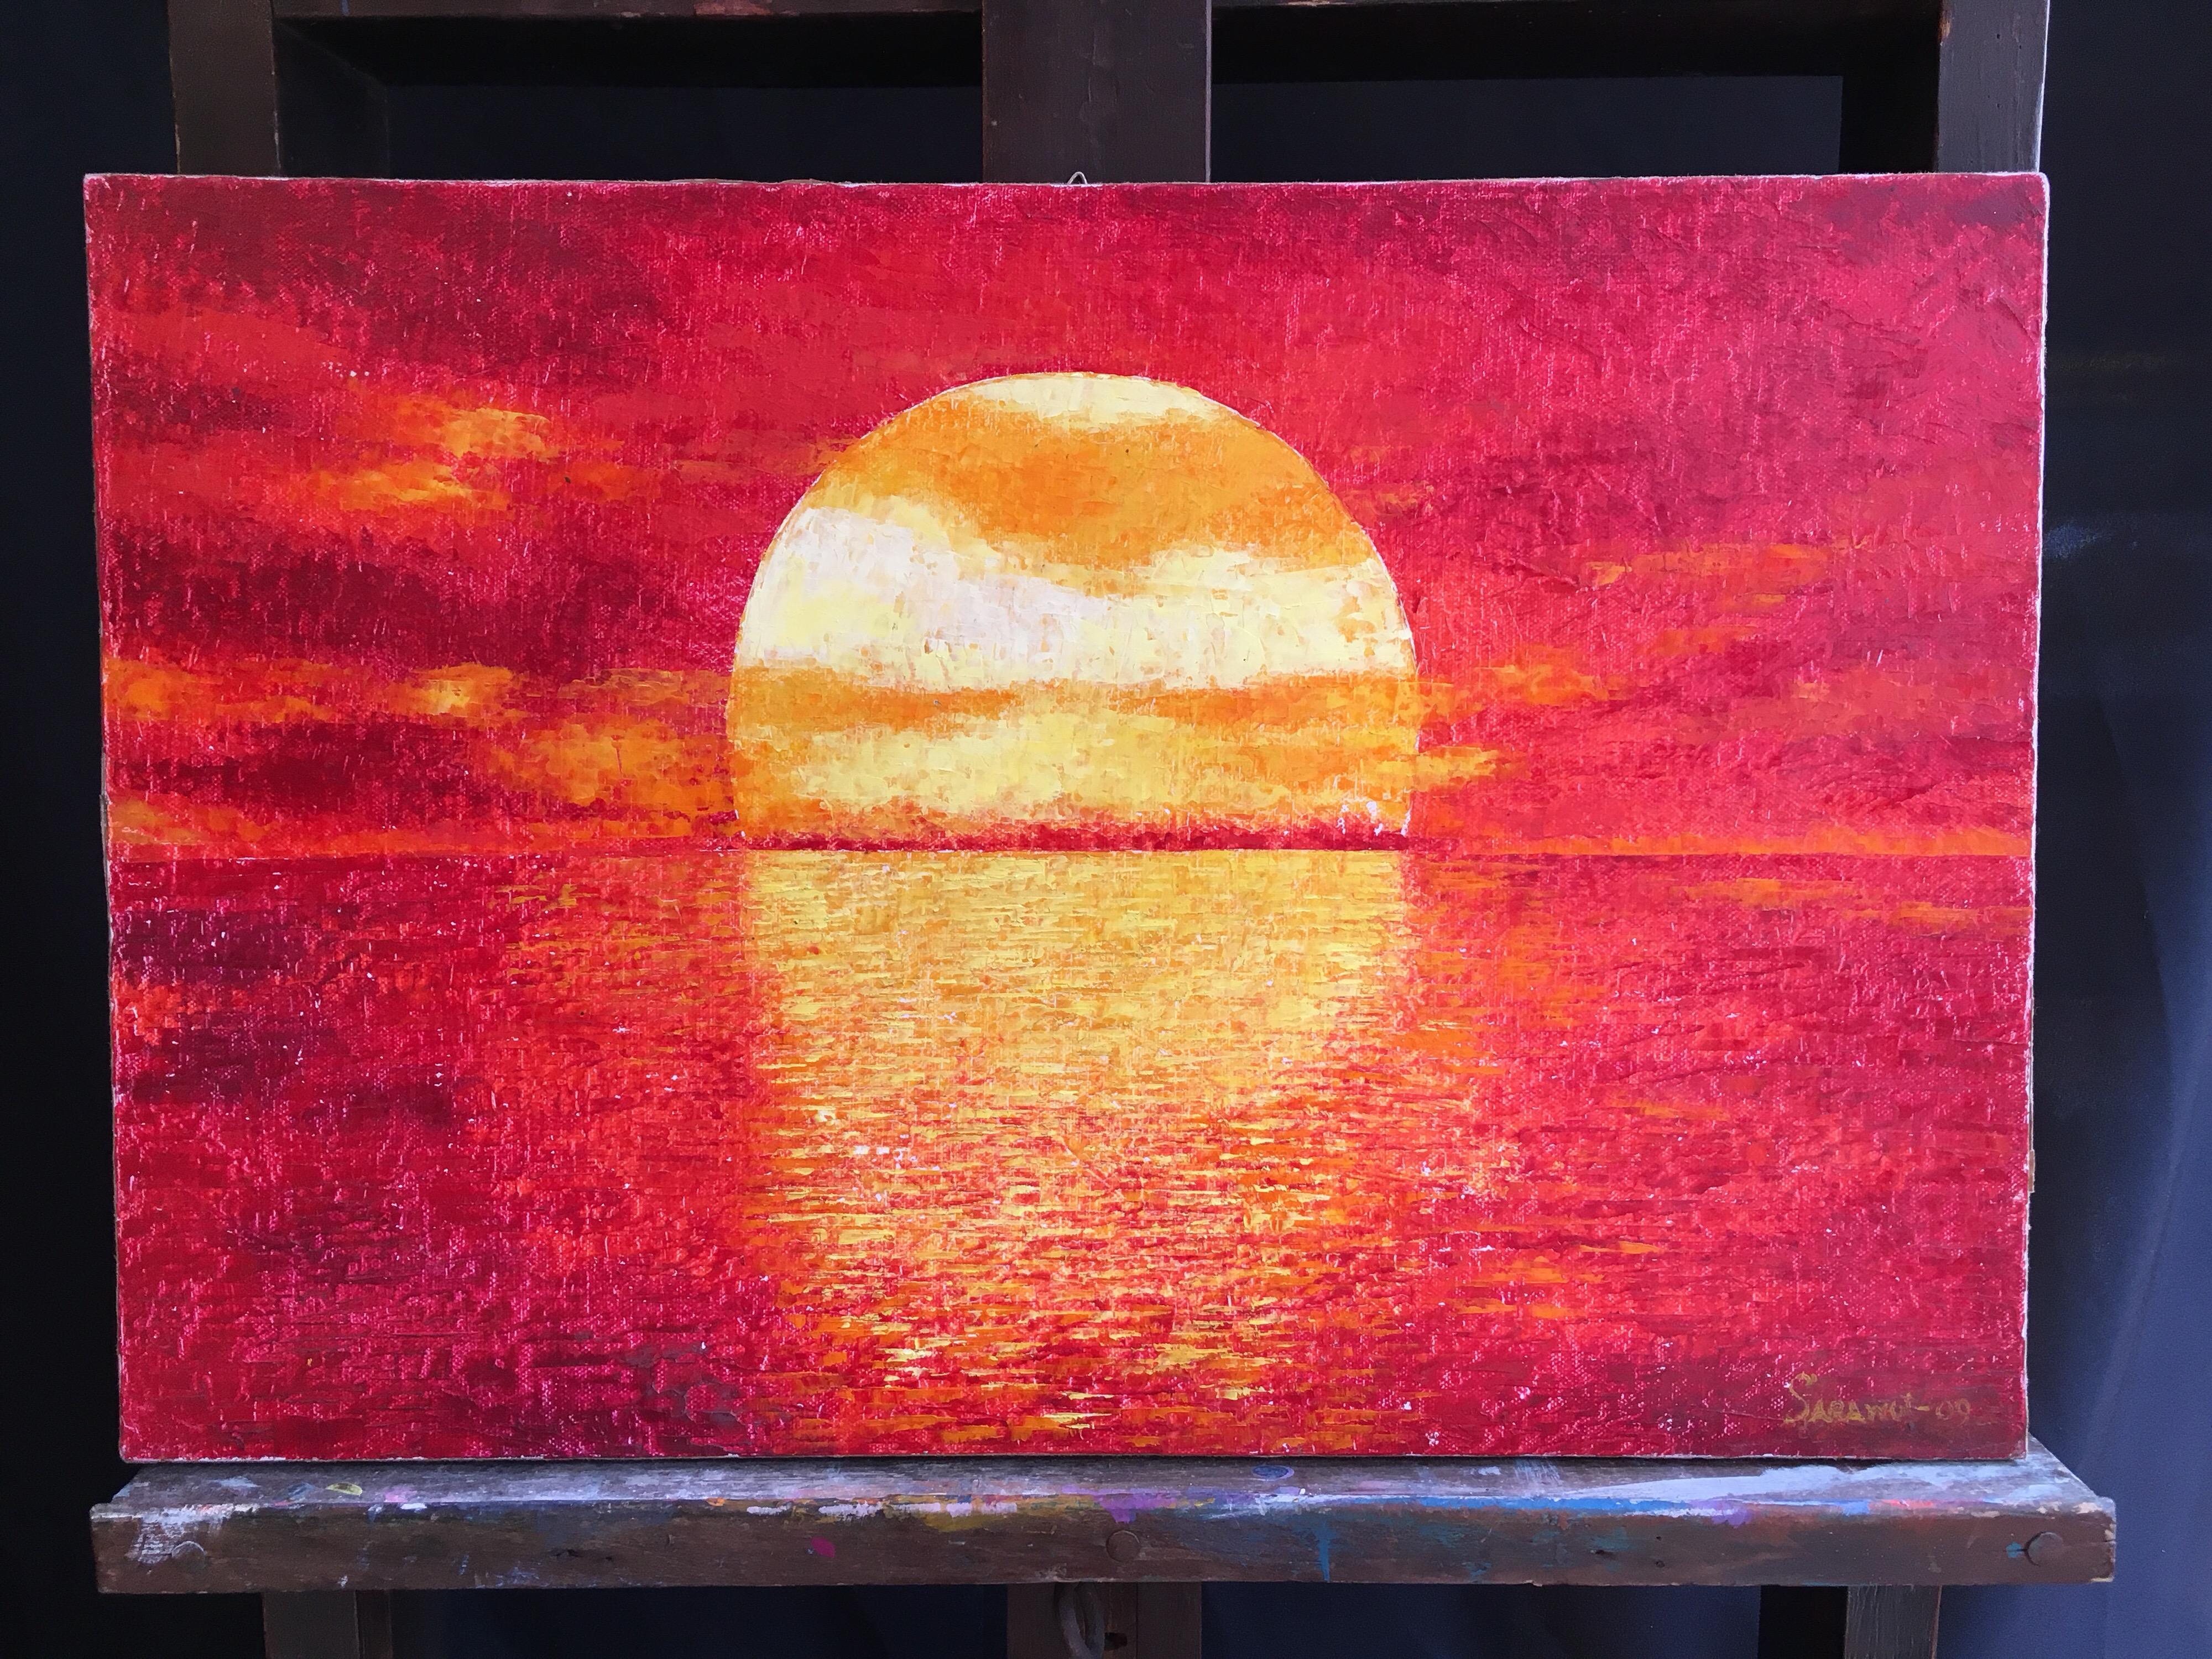 Red Sky, Impressionist Landscape, Signed Oil Painting
Signed by the artist and dated '09' on the lower right hand corner
Oil painting on canvas, unframed
Canvas size: 16 x 24 inches

Beautiful impressionist of a sunset, the colour is so intense that